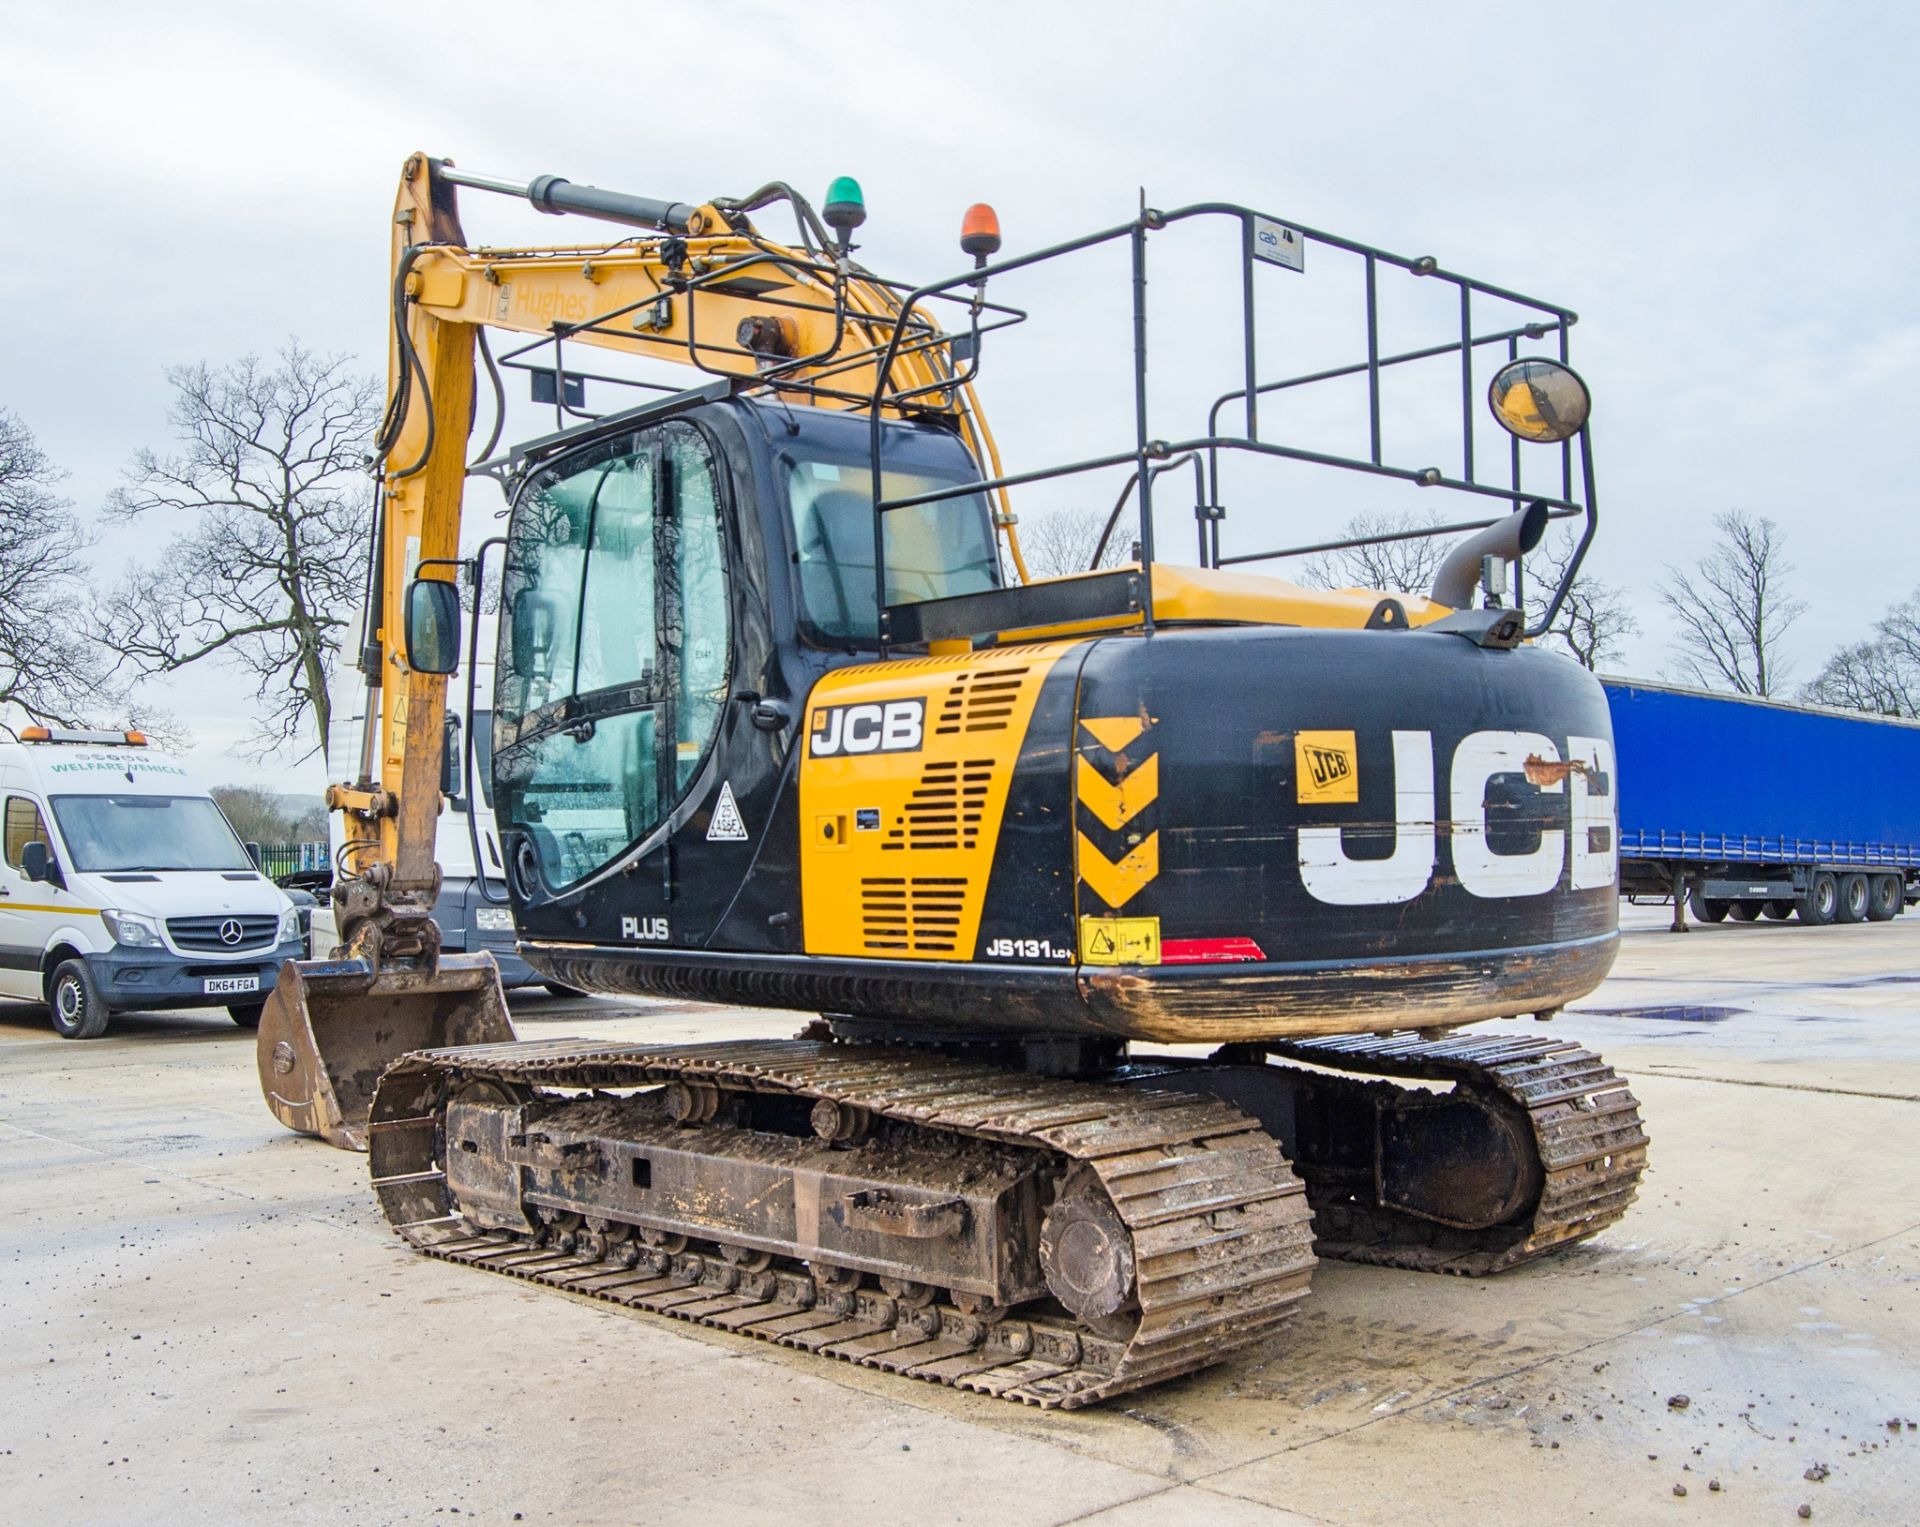 JCB JS131 LC+ 13 tonne steel tracked excavator Year: 2018 S/N: 2442347 Recorded Hours: 5575 piped. - Image 4 of 31